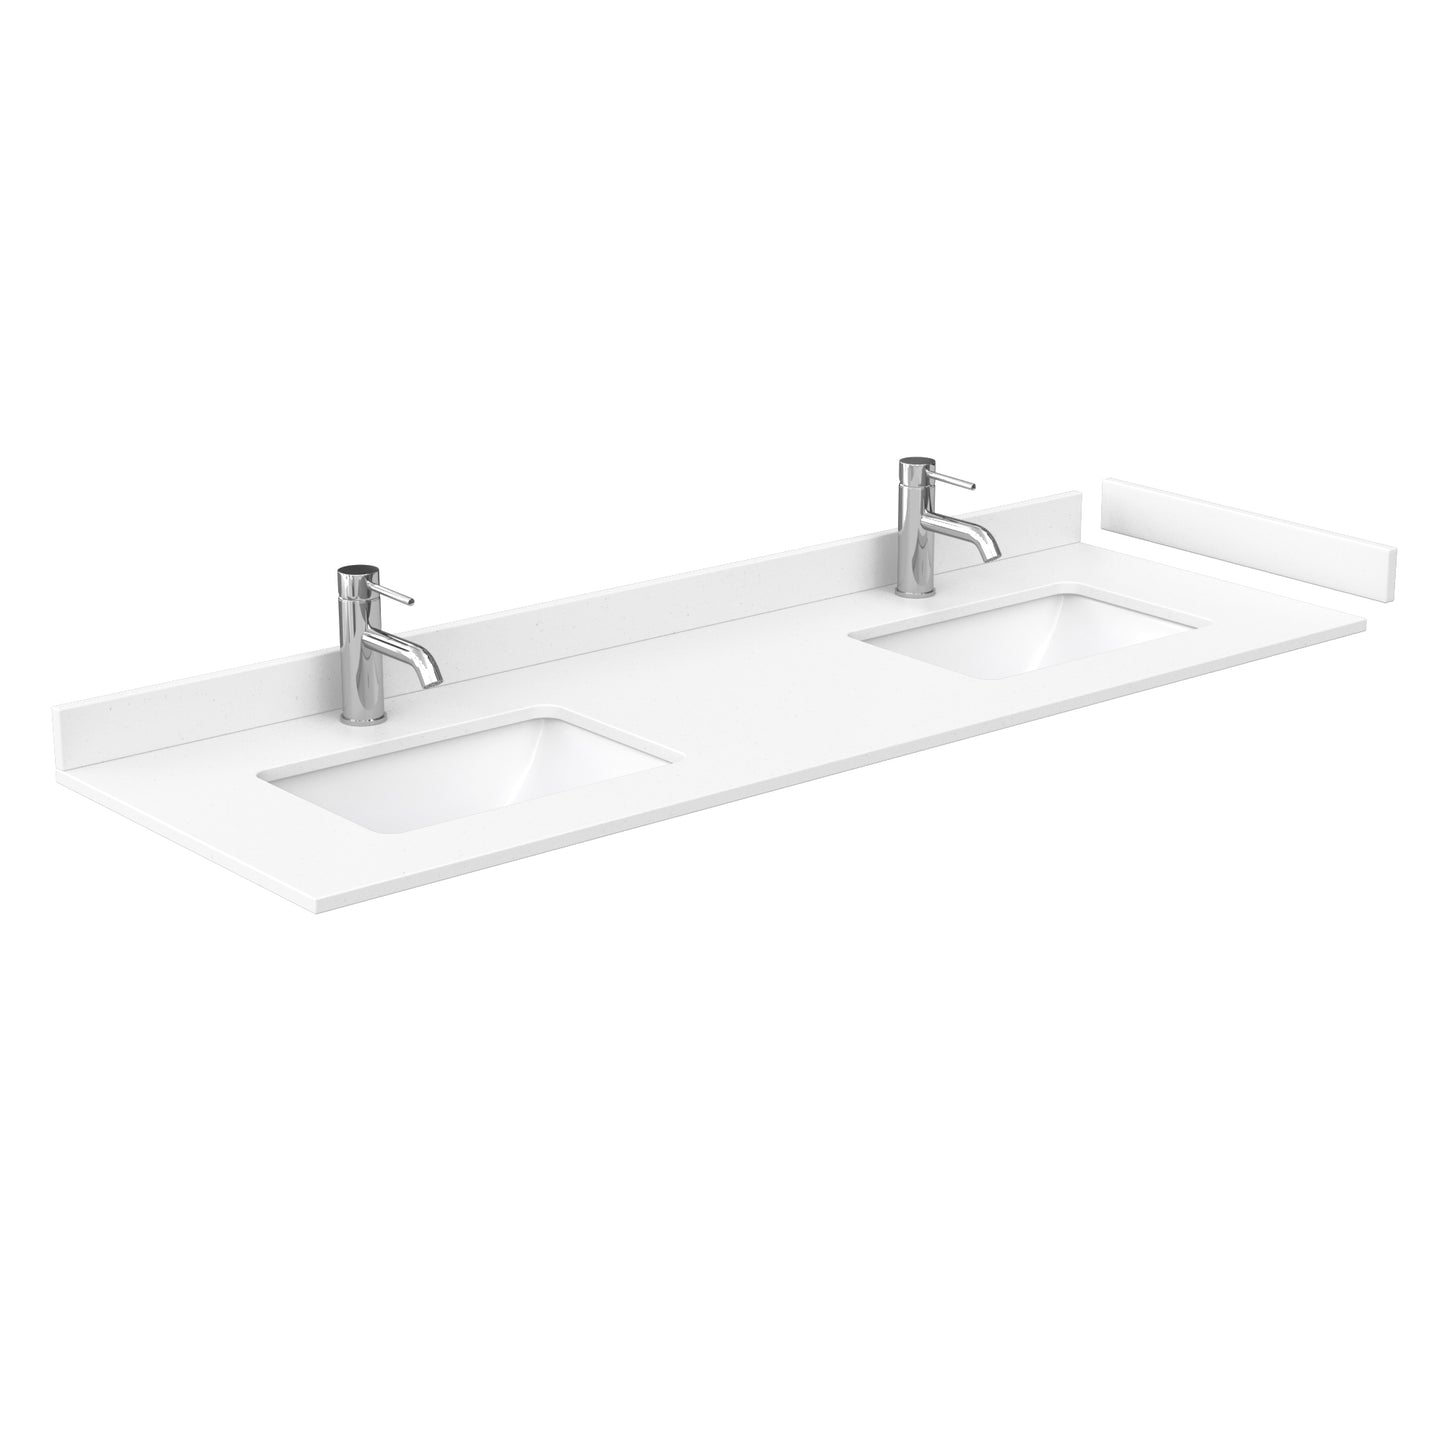 Wyndham Icon 66 Inch Double Bathroom Vanity in White with White Cultured Marble Countertop, Undermount Square Sinks and Satin Bronze Trim - Luxe Bathroom Vanities